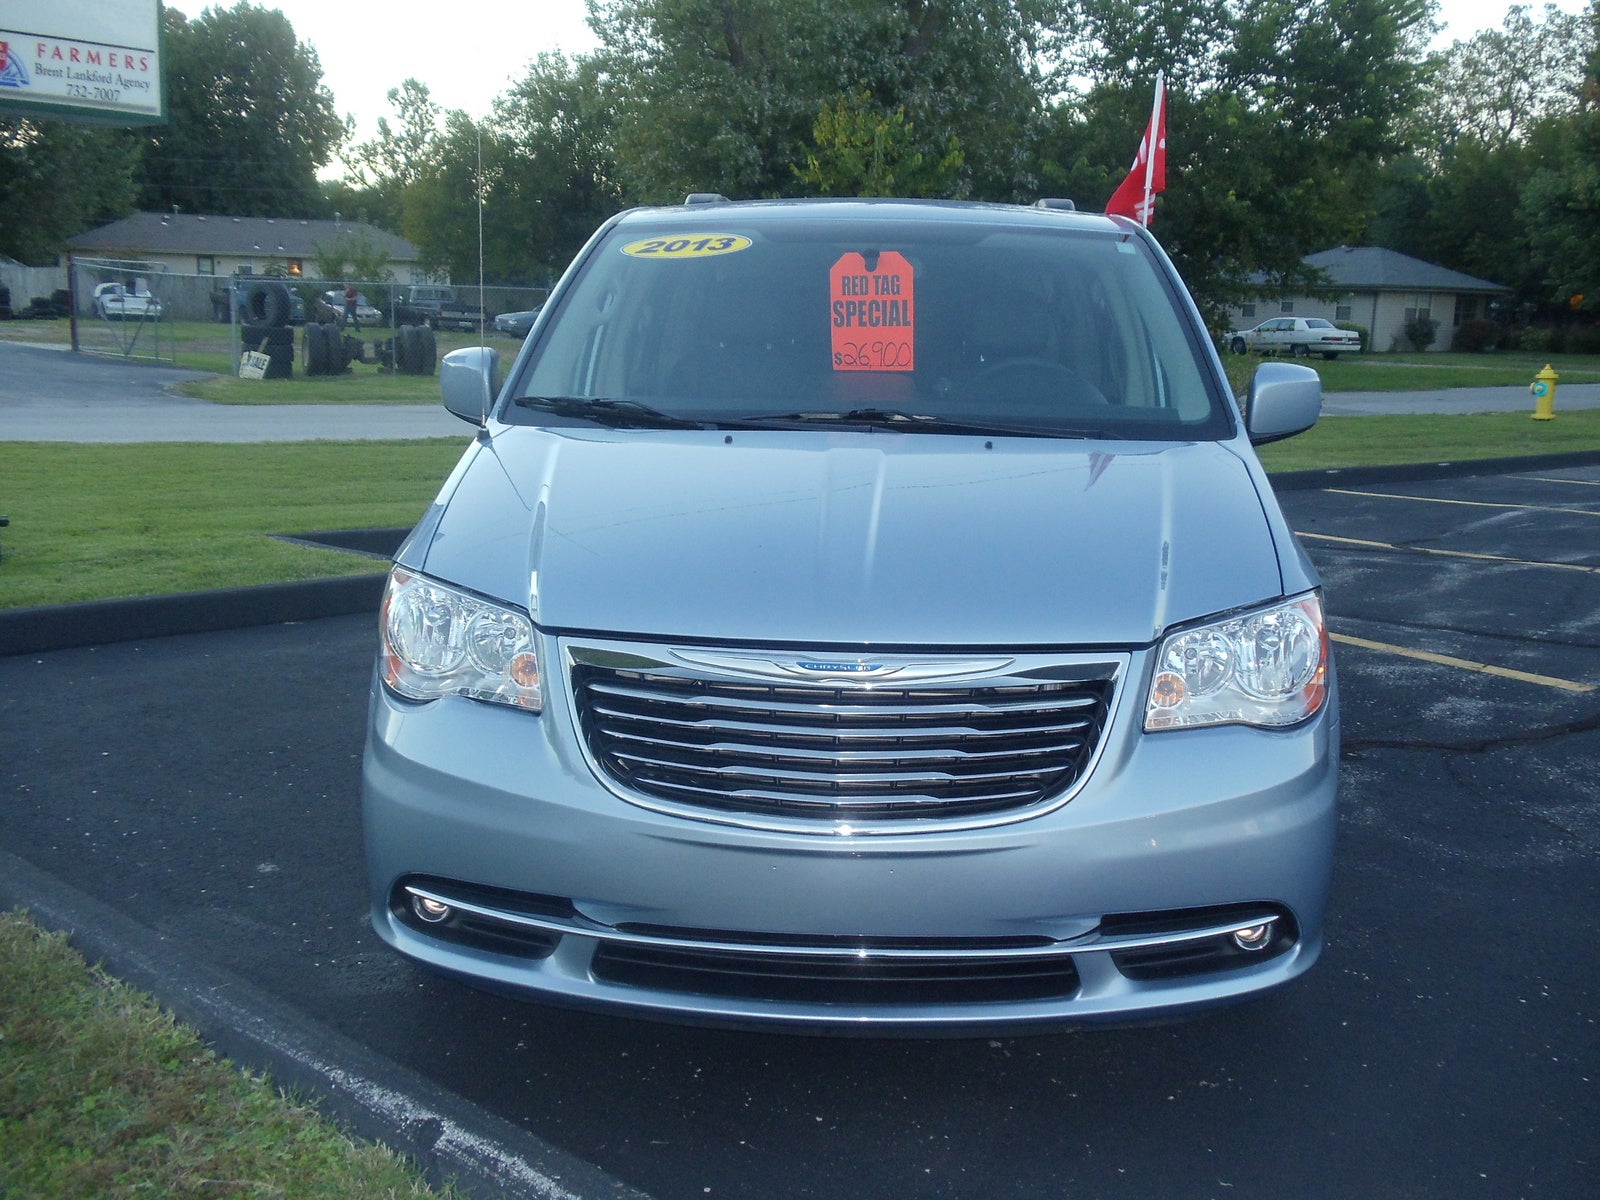 Chrysler town and country 2004 recalls #2